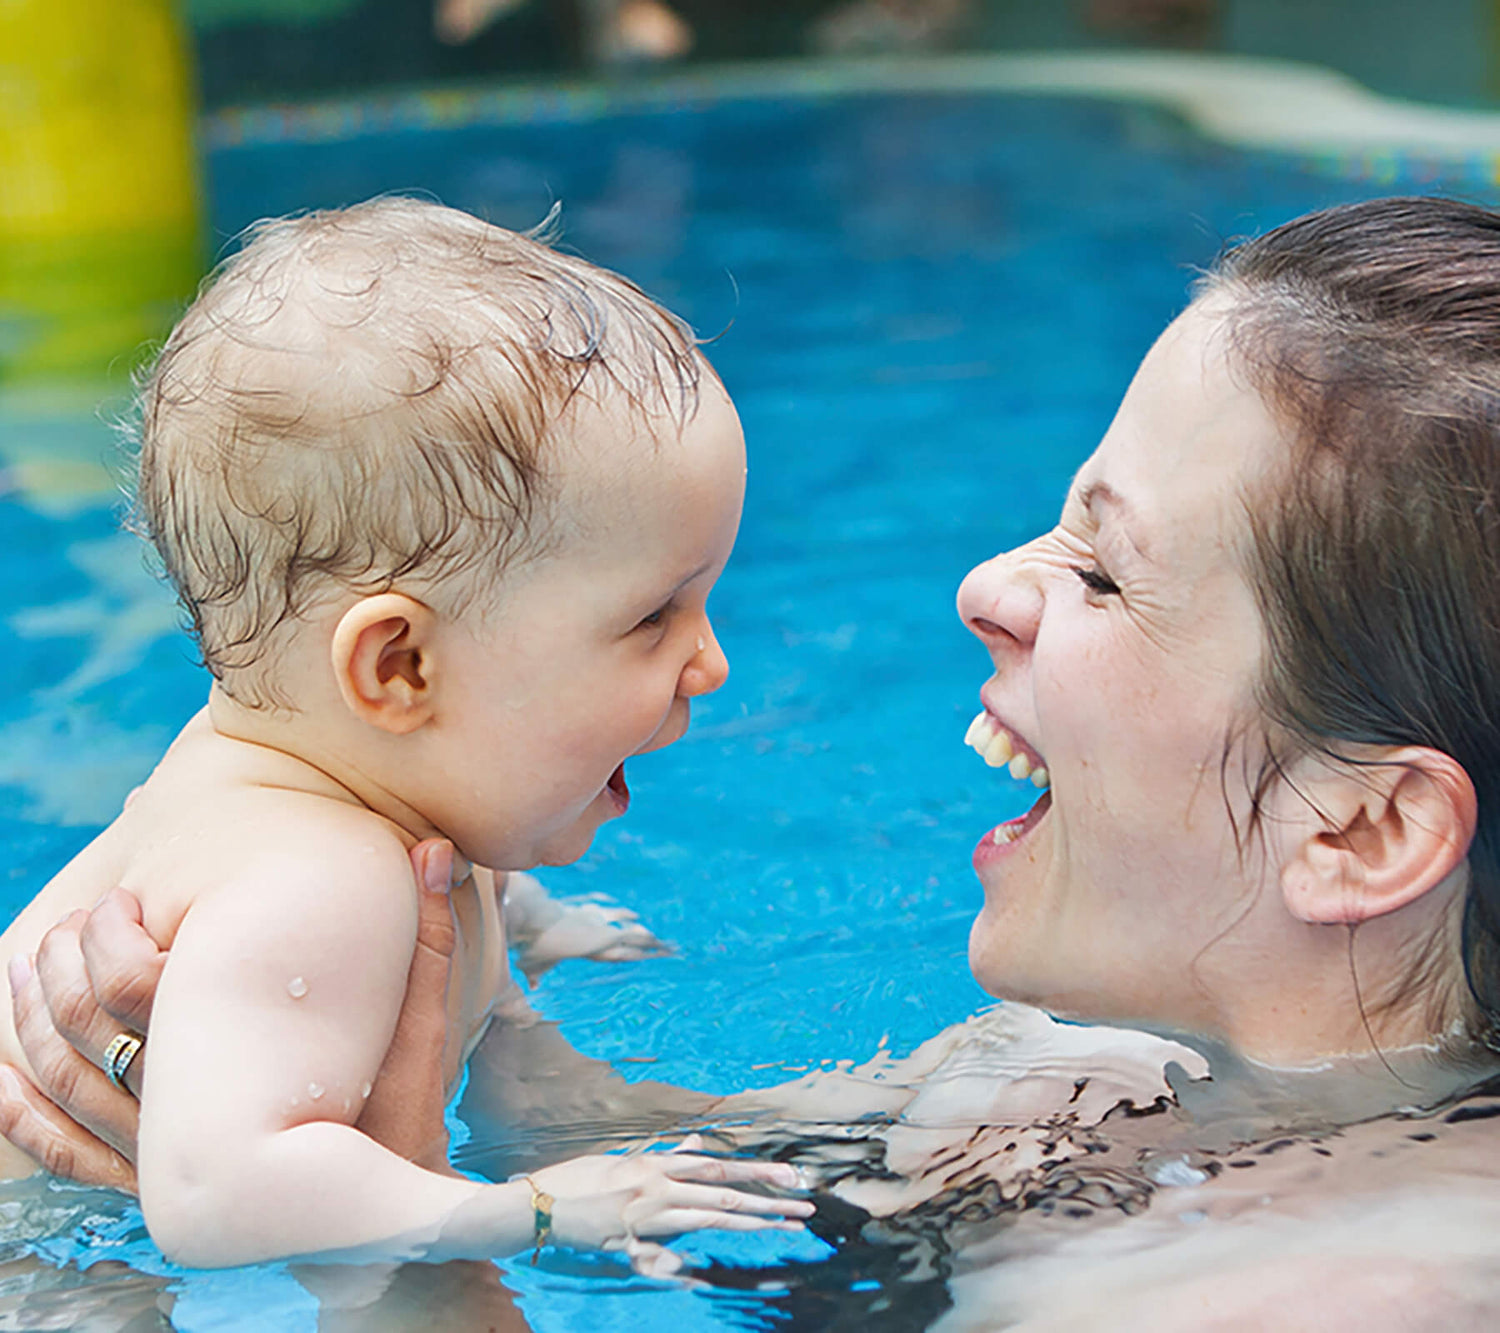 When Can I Teach My Baby to Swim?